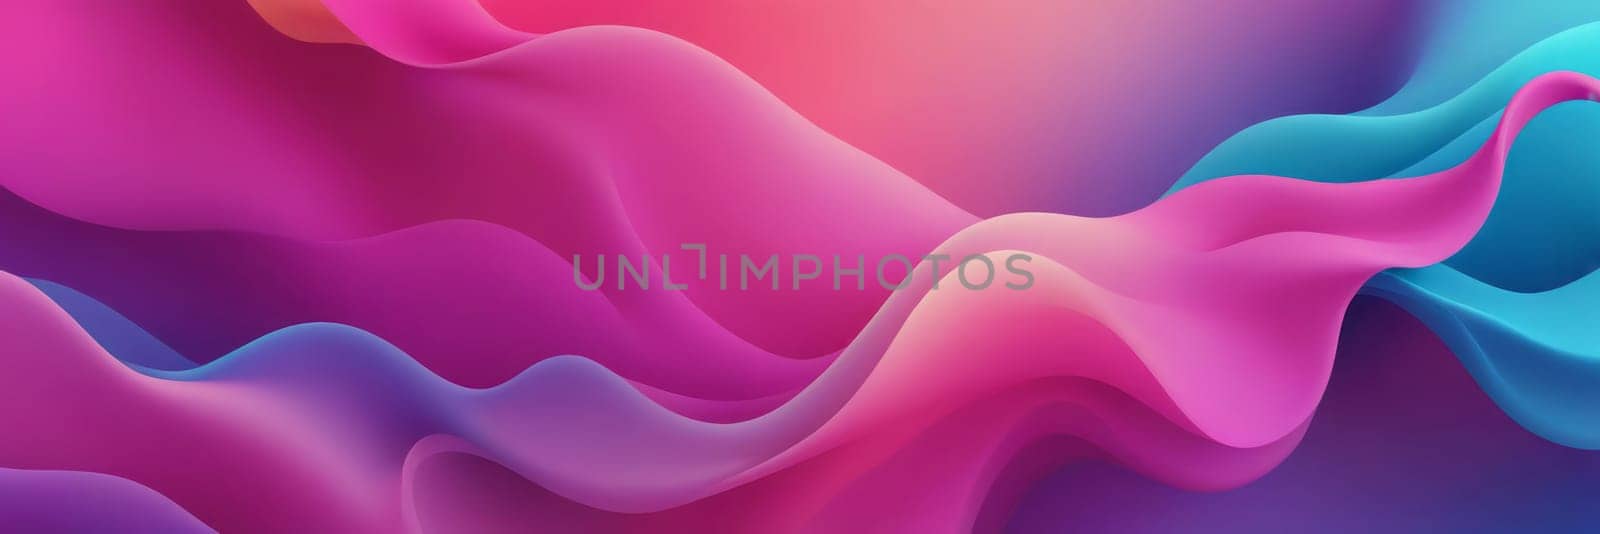 Amorphous Shapes in Fuchsia and Lightskyblue by nkotlyar